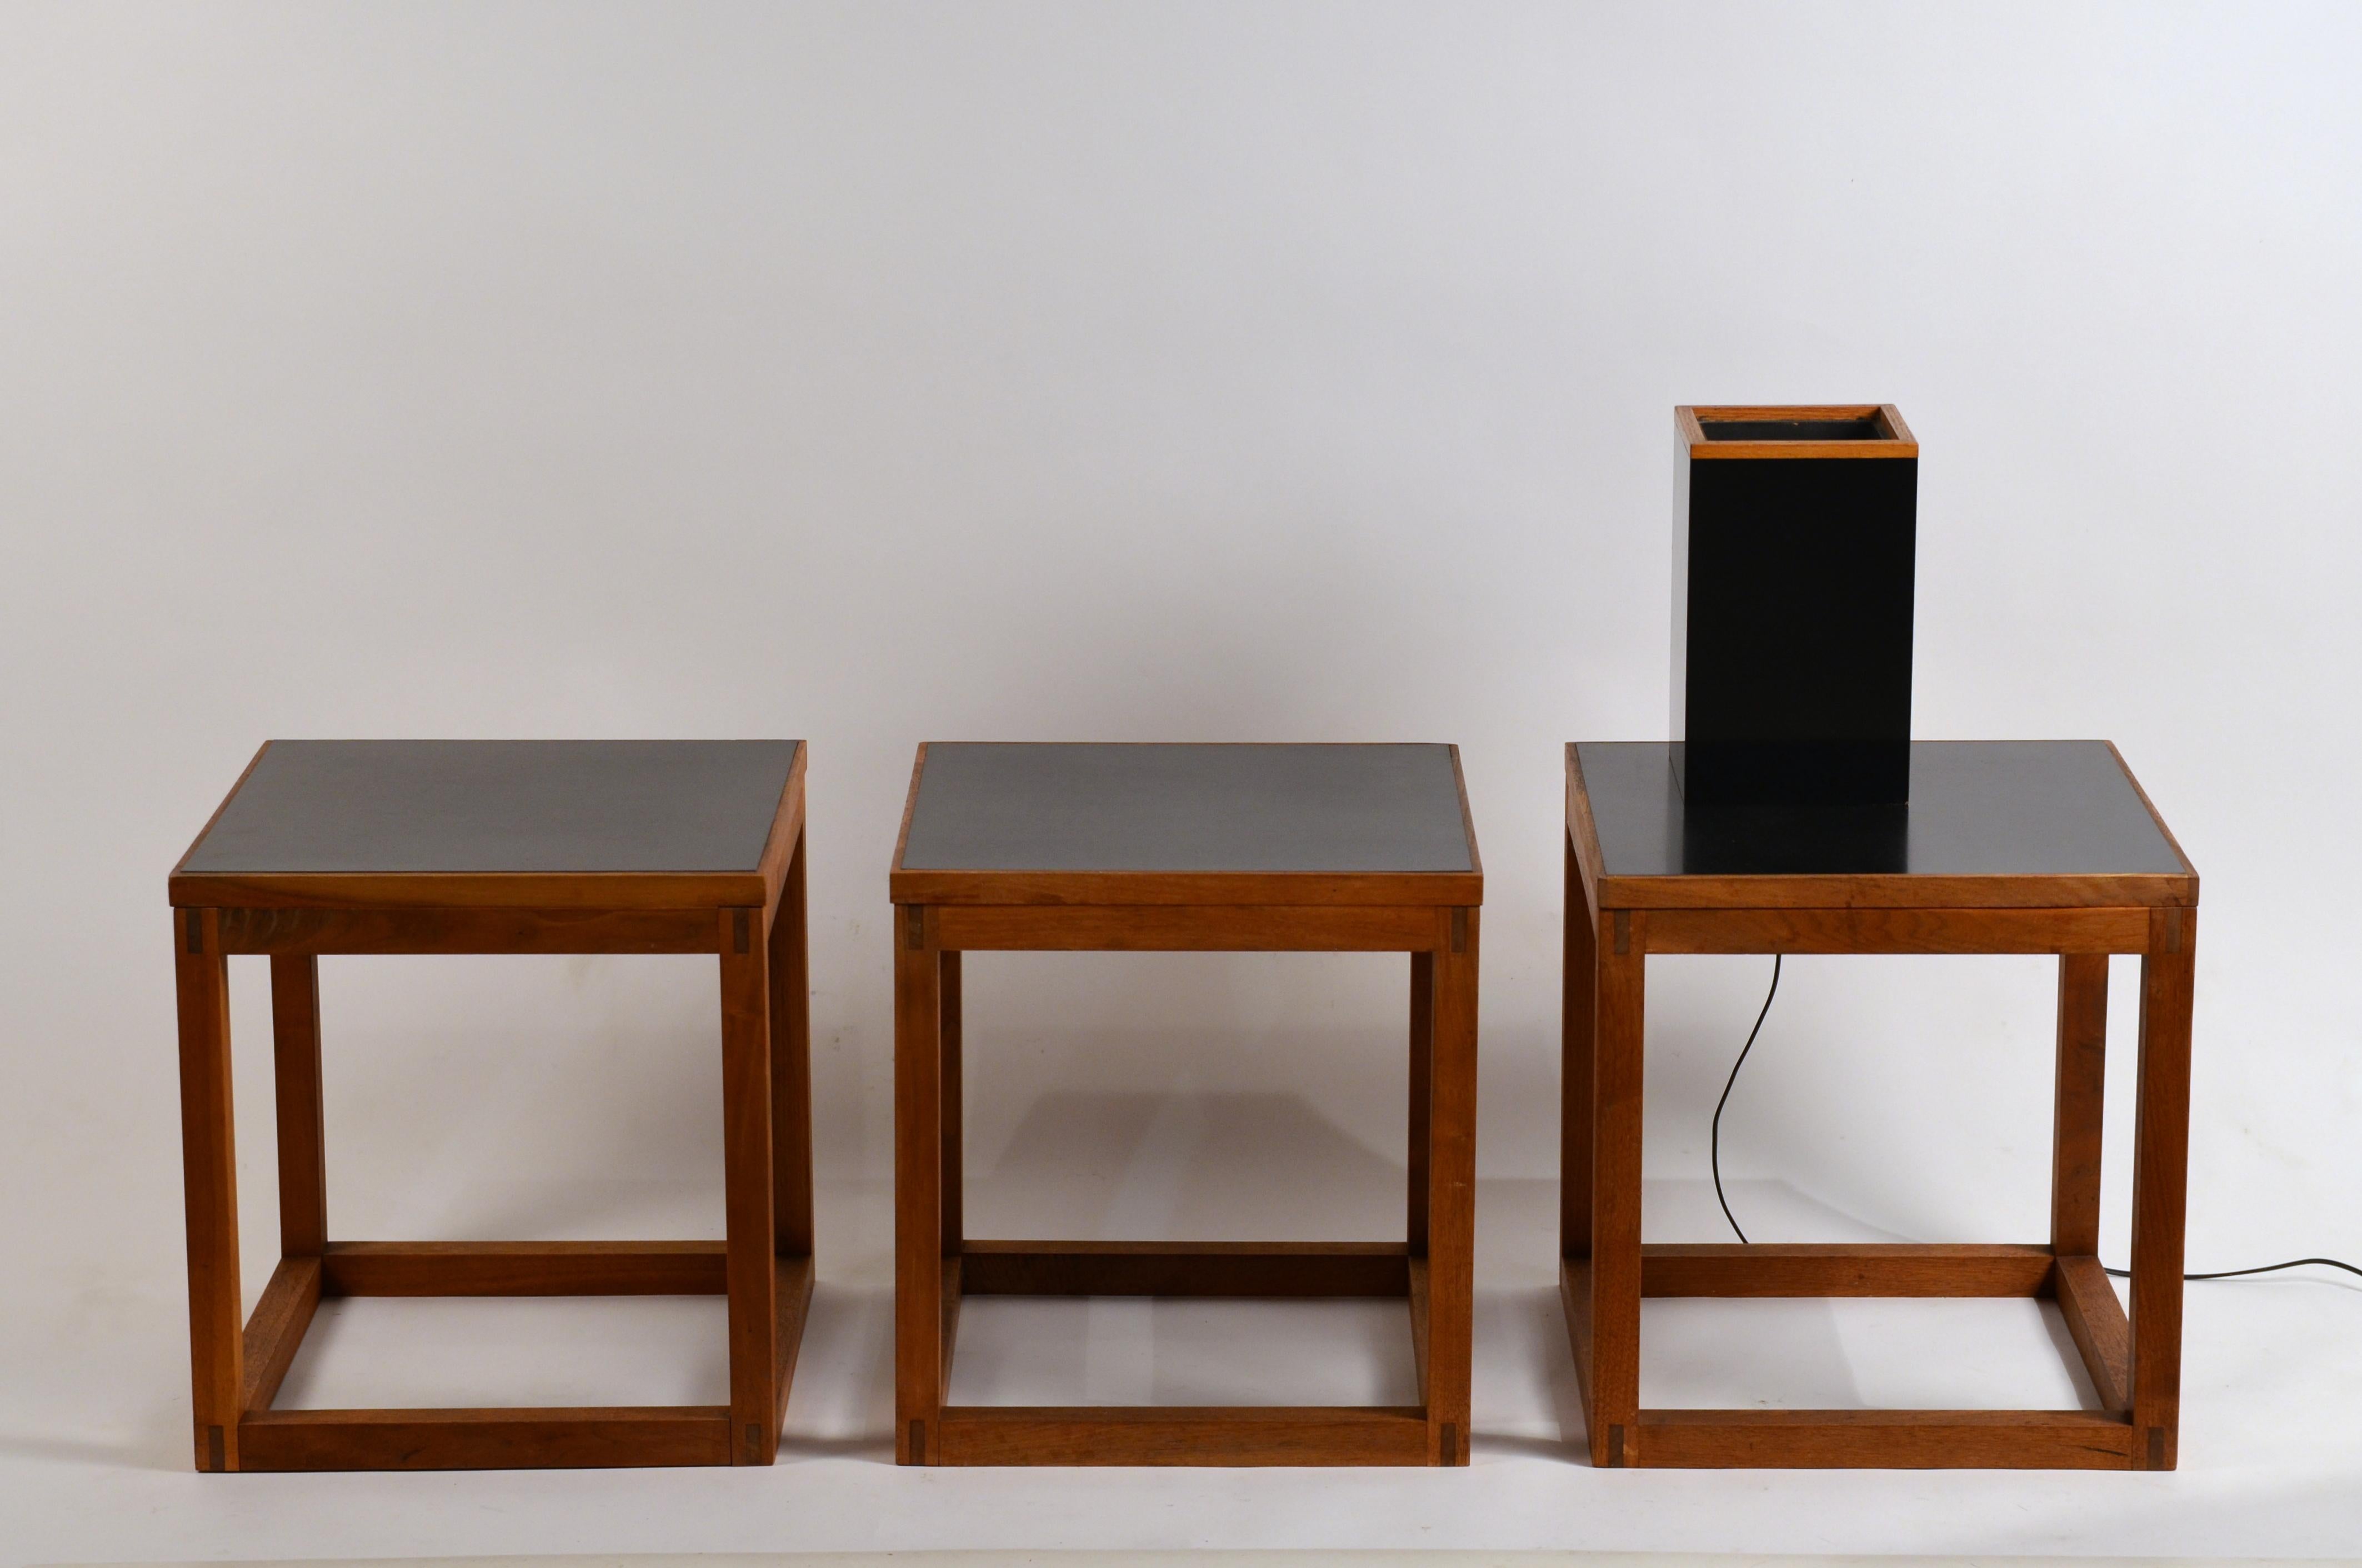 Set of 3 Minimal Teak and Laminate Cube Tables in the Style of Donald Judd In Excellent Condition For Sale In Los Angeles, CA